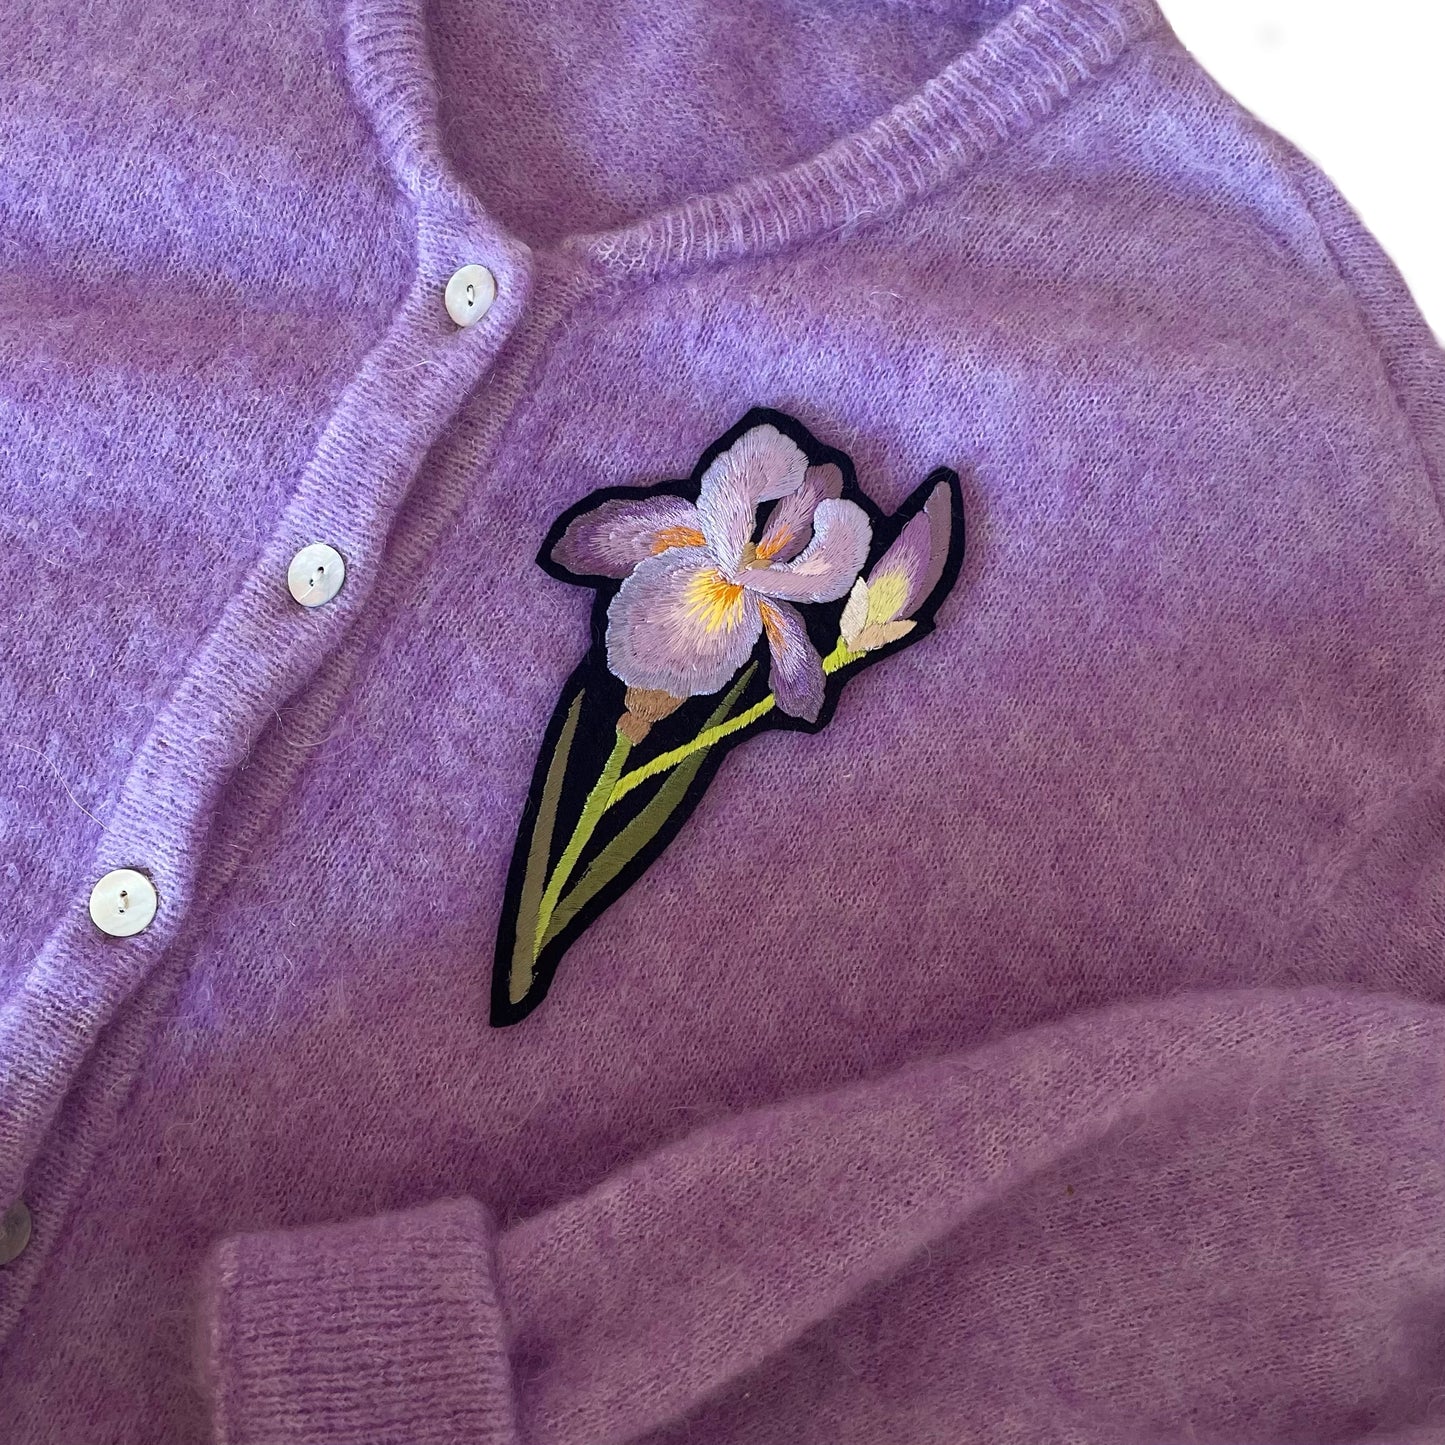 Embroidered iris patch shown on the breast of a purple cardigan